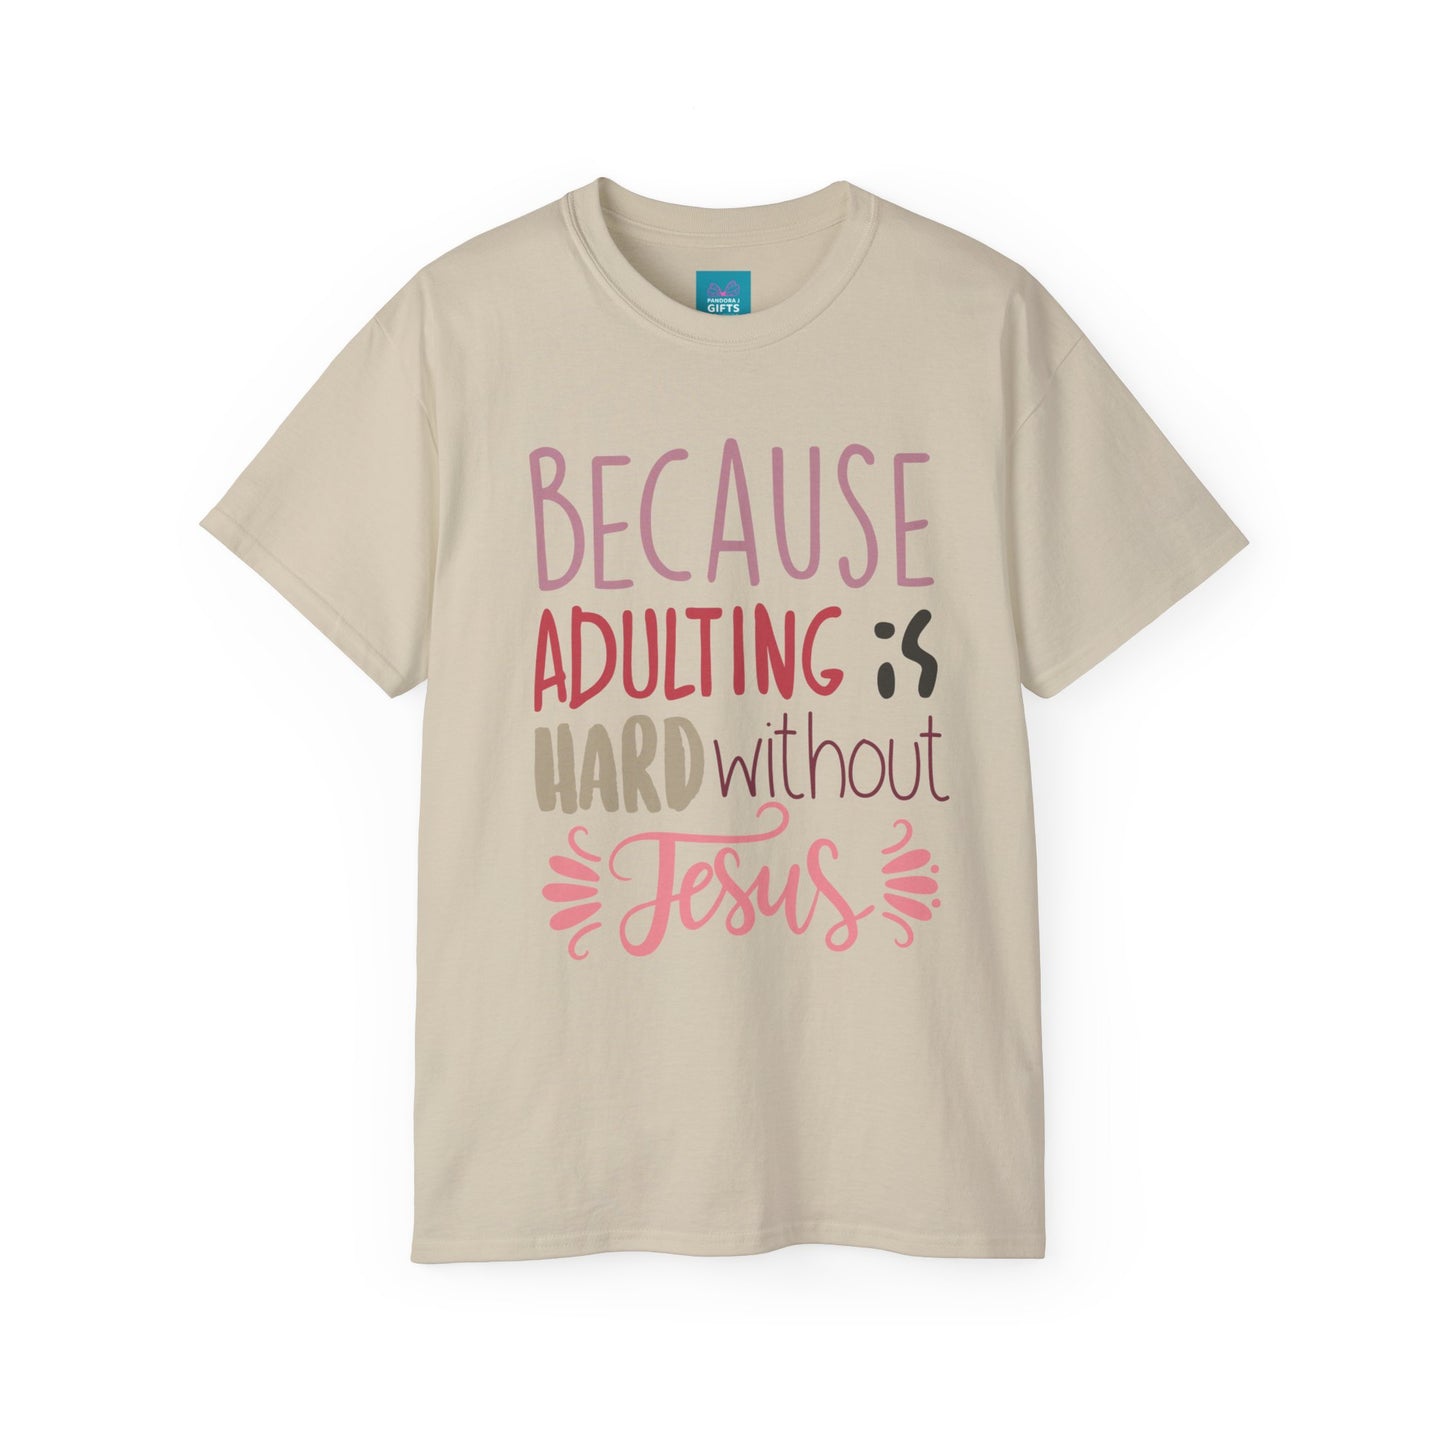 Yellow shirt with words "Because Adulting is Hard without Jesus"